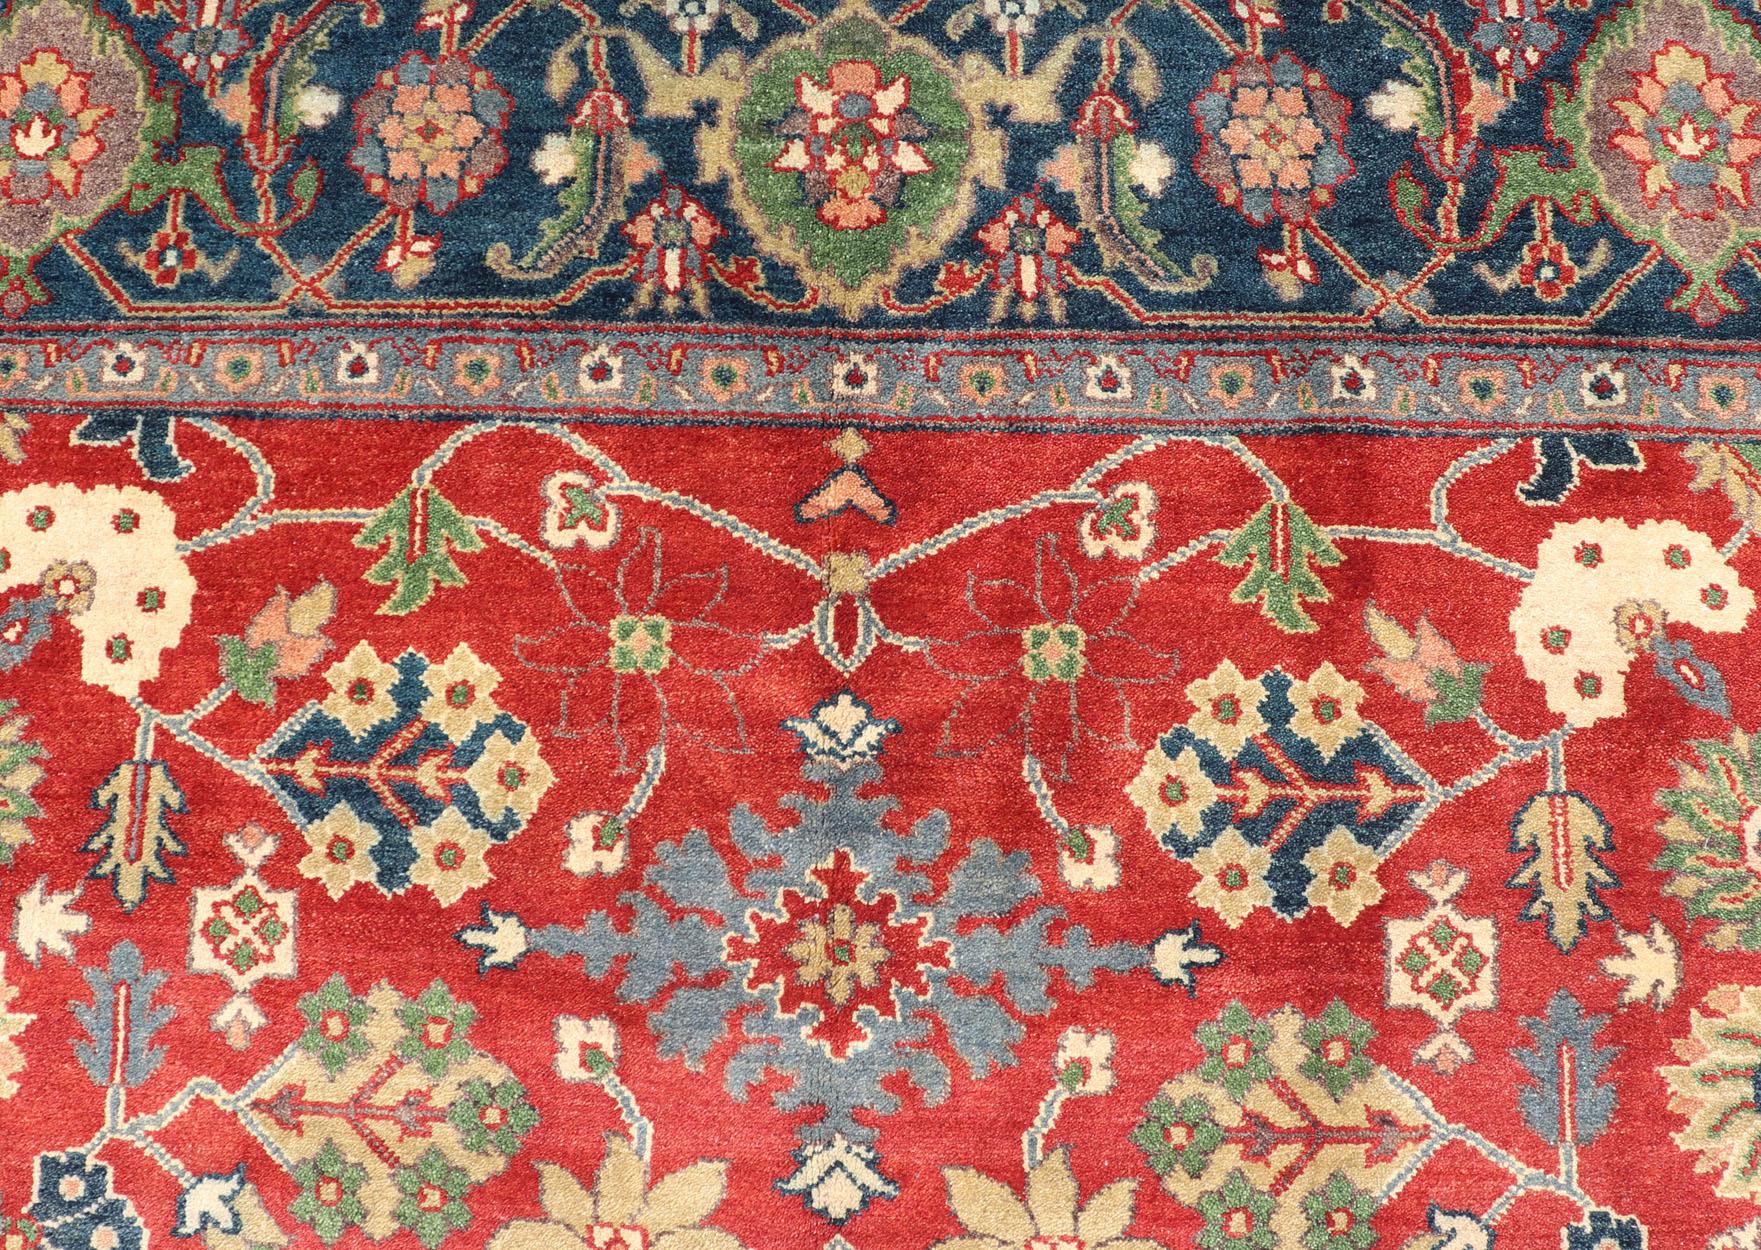 Wool Reproduction Sultanabad-Mahal All-over Floral Hand-Knotted Carpet 